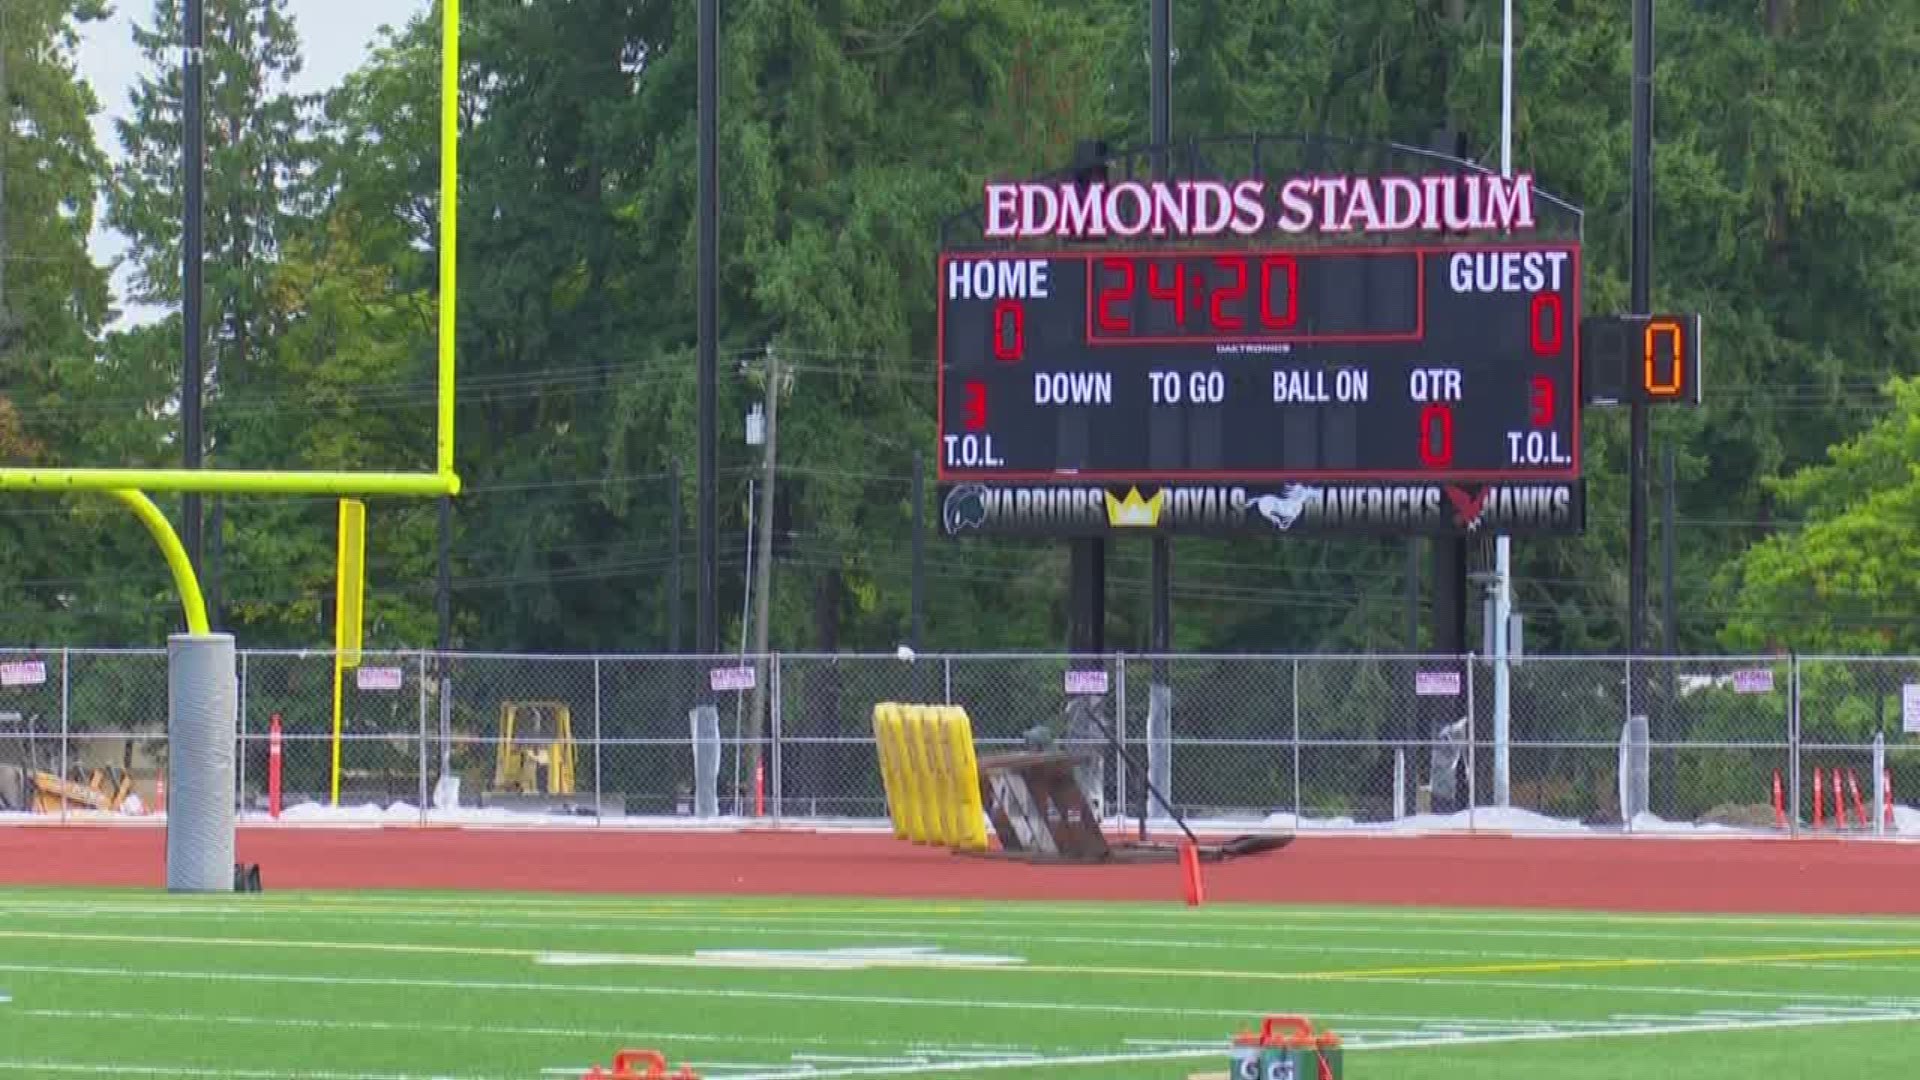 At least four public athletic fields have been targeted for copper wire thefts, resulting in costly repairs for school districts. KING 5's Kalie Greenberg reports.